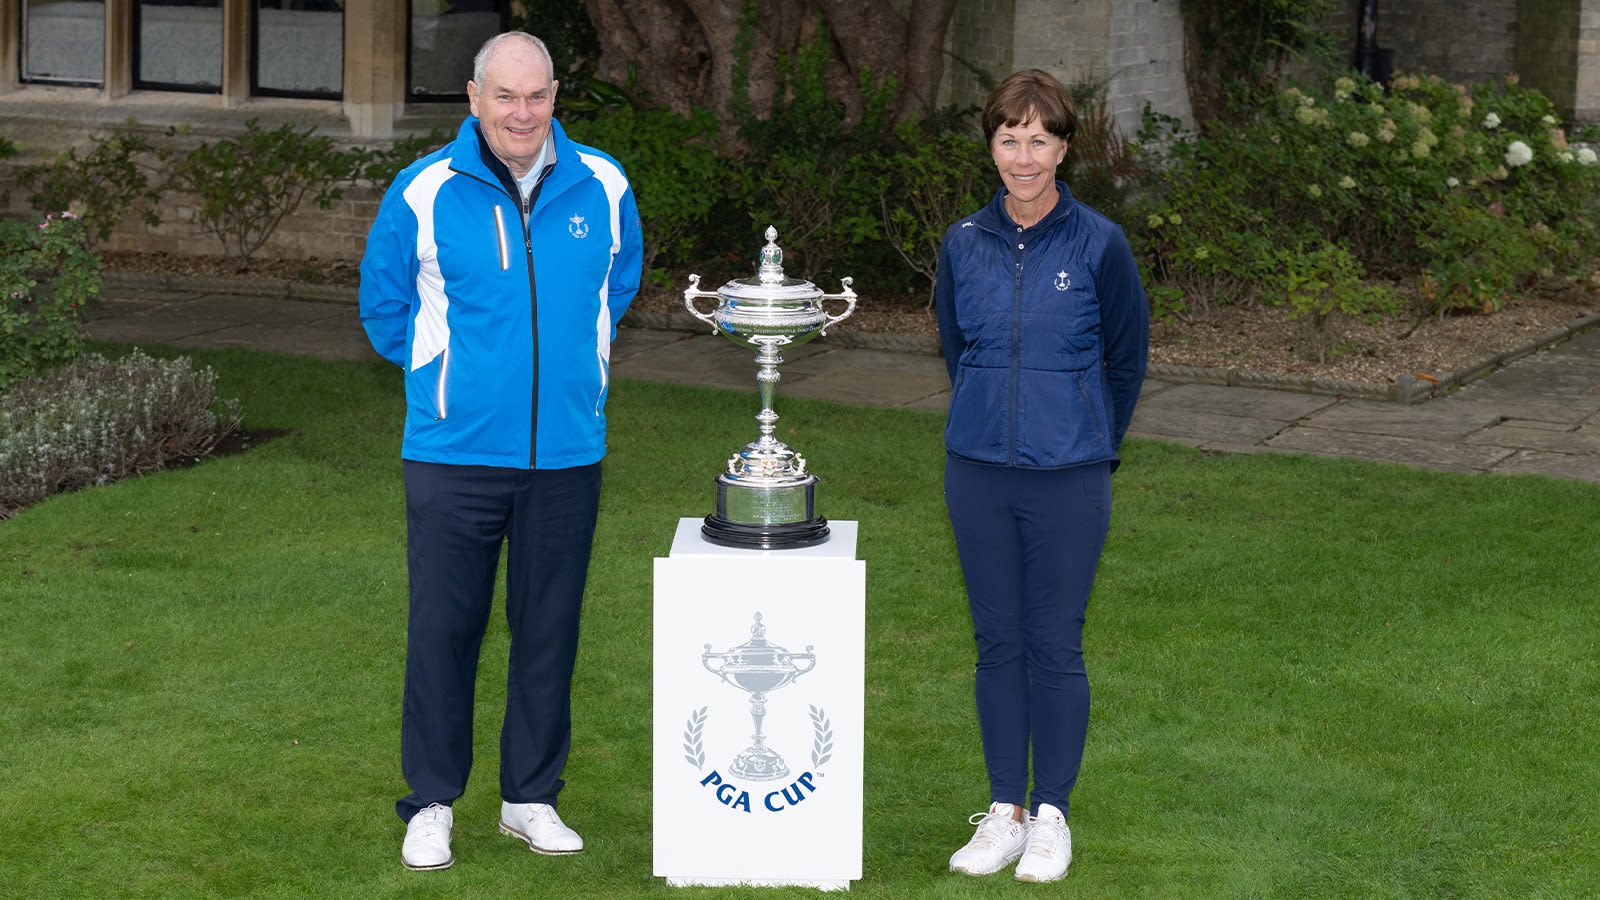 Great Britain and Ireland Captain, DJ Russell and Captain and PGA of America Honorary President, Suzy Whaley pose with the Llandudno trophy during the 30th PGA Cup at Foxhills Golf Club on September 15, 2022 in Ottershaw, England. (Photo by Matthew Harris/PGA of America)